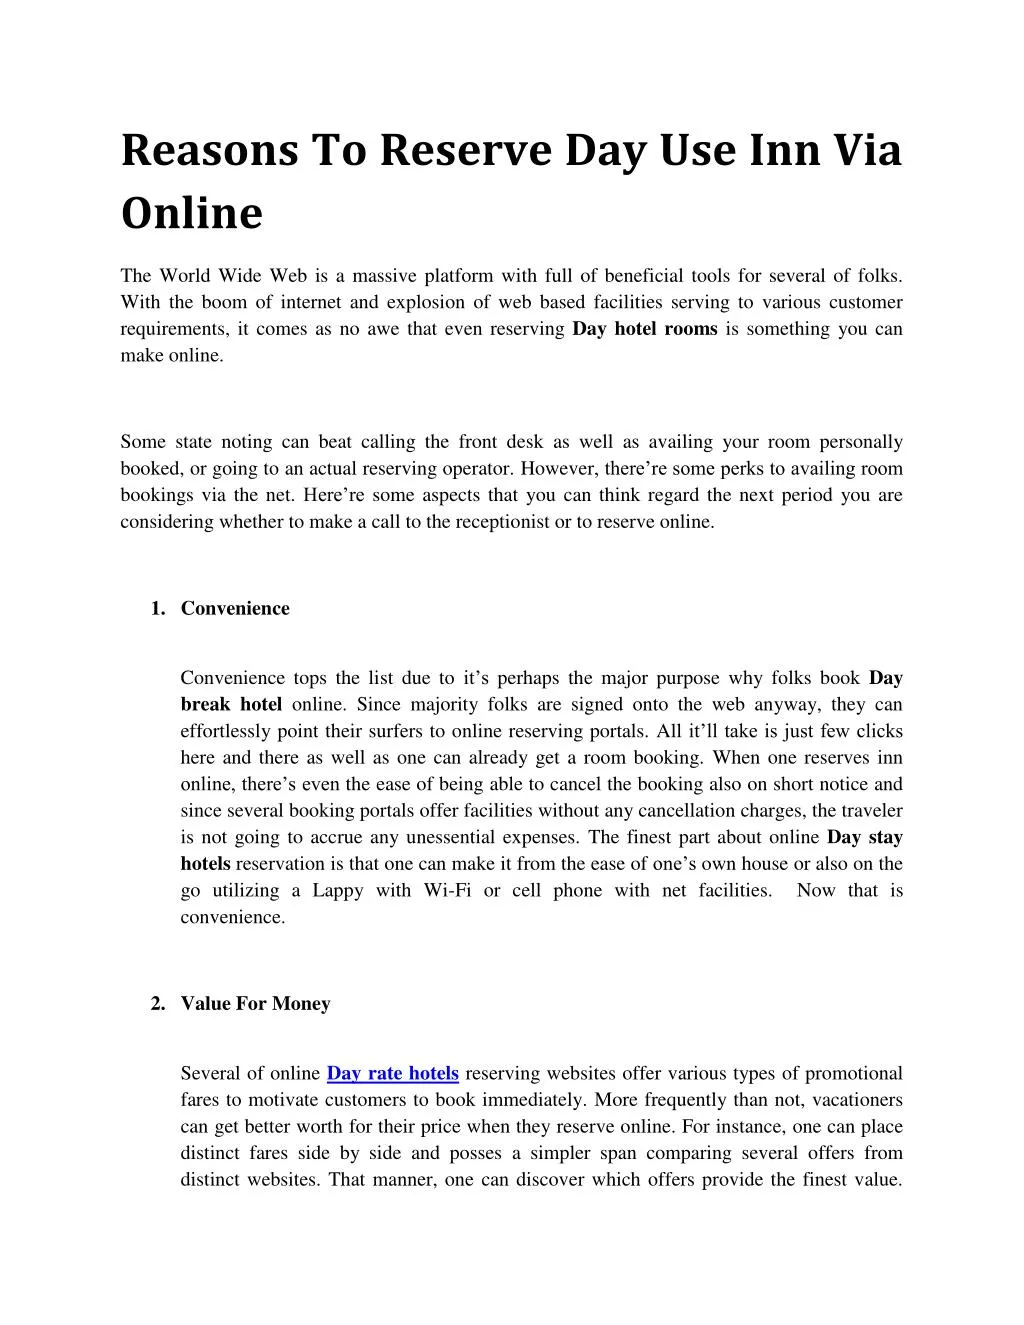 reasons to reserve day use inn via online